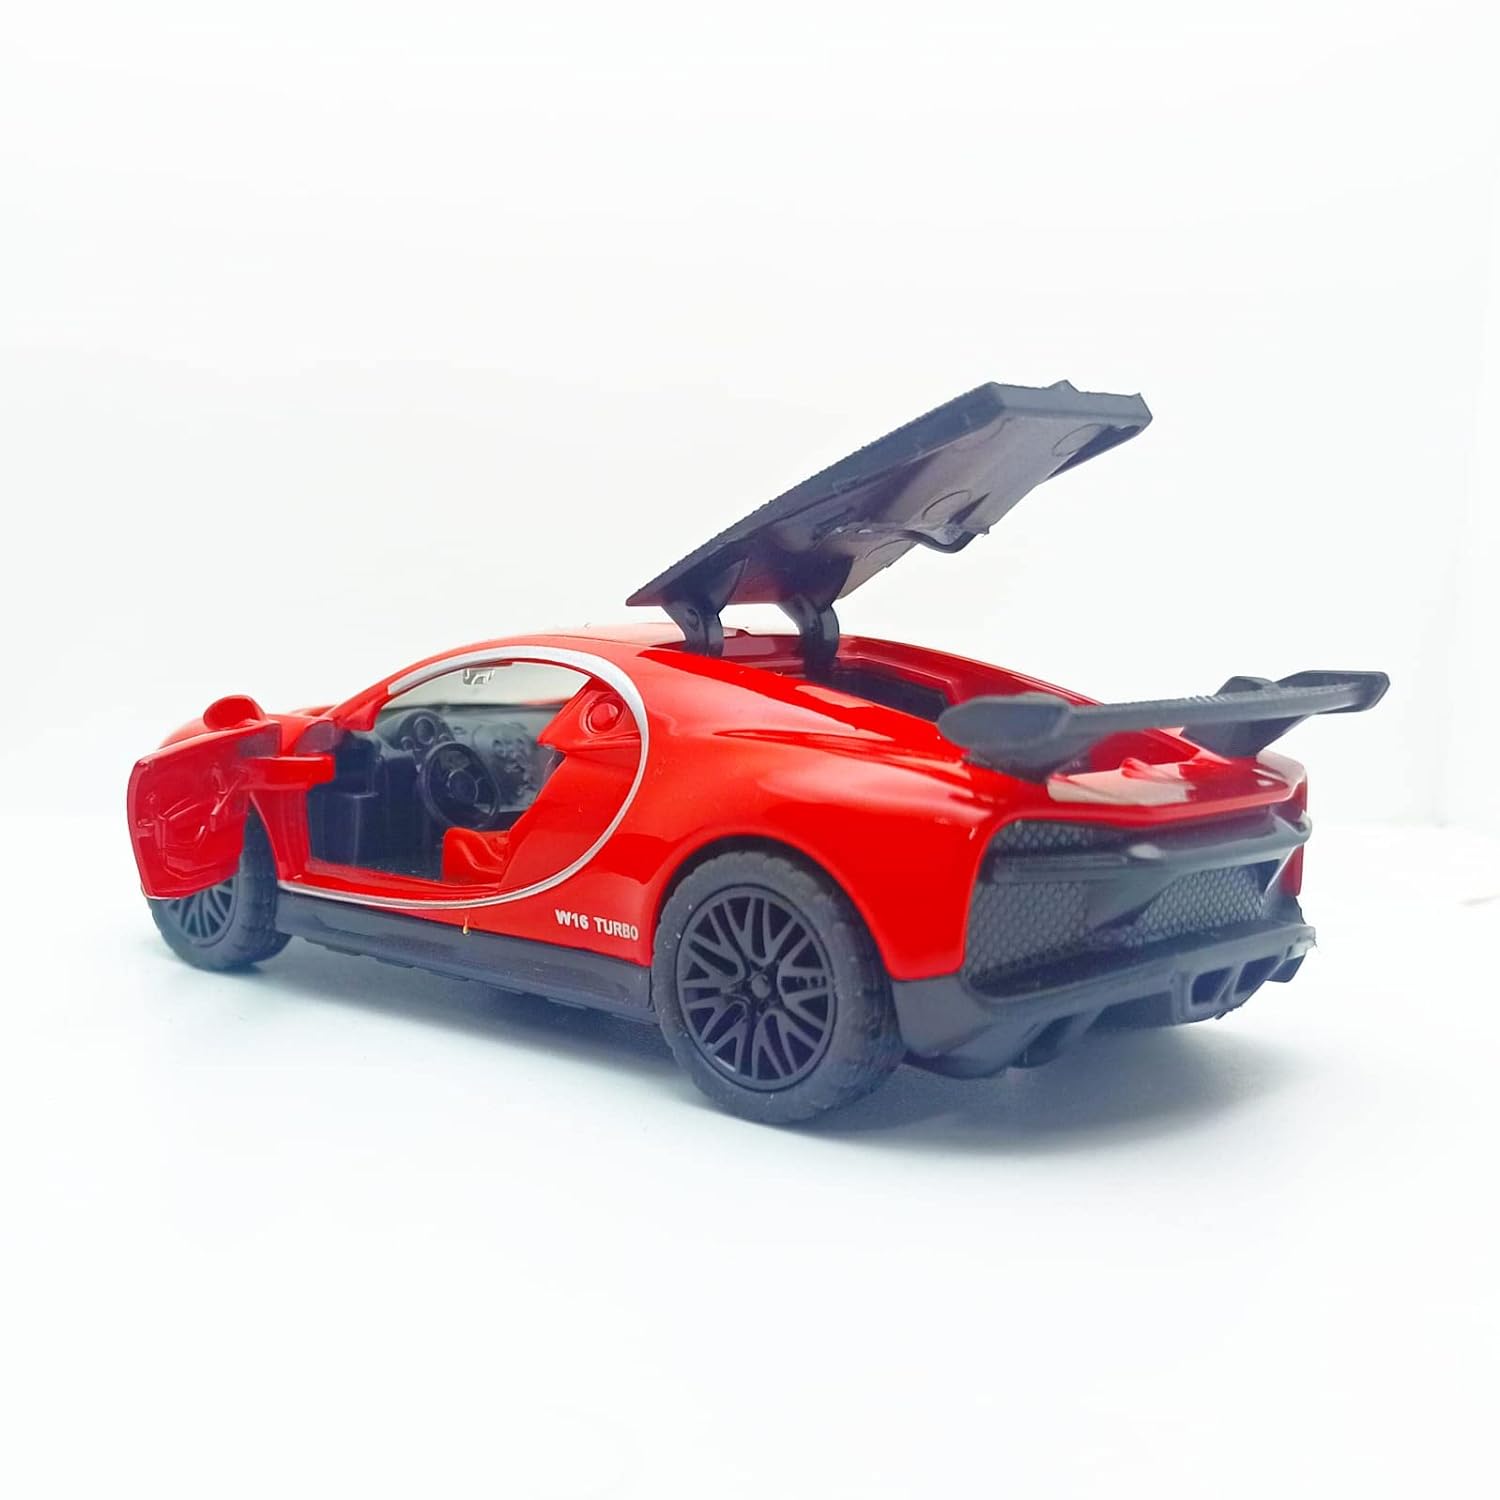 BUGATTI CHIRON ALLOY METAL (RED) RACING SPORT CAR TOY DOORS & TAILGATE OPENABLE